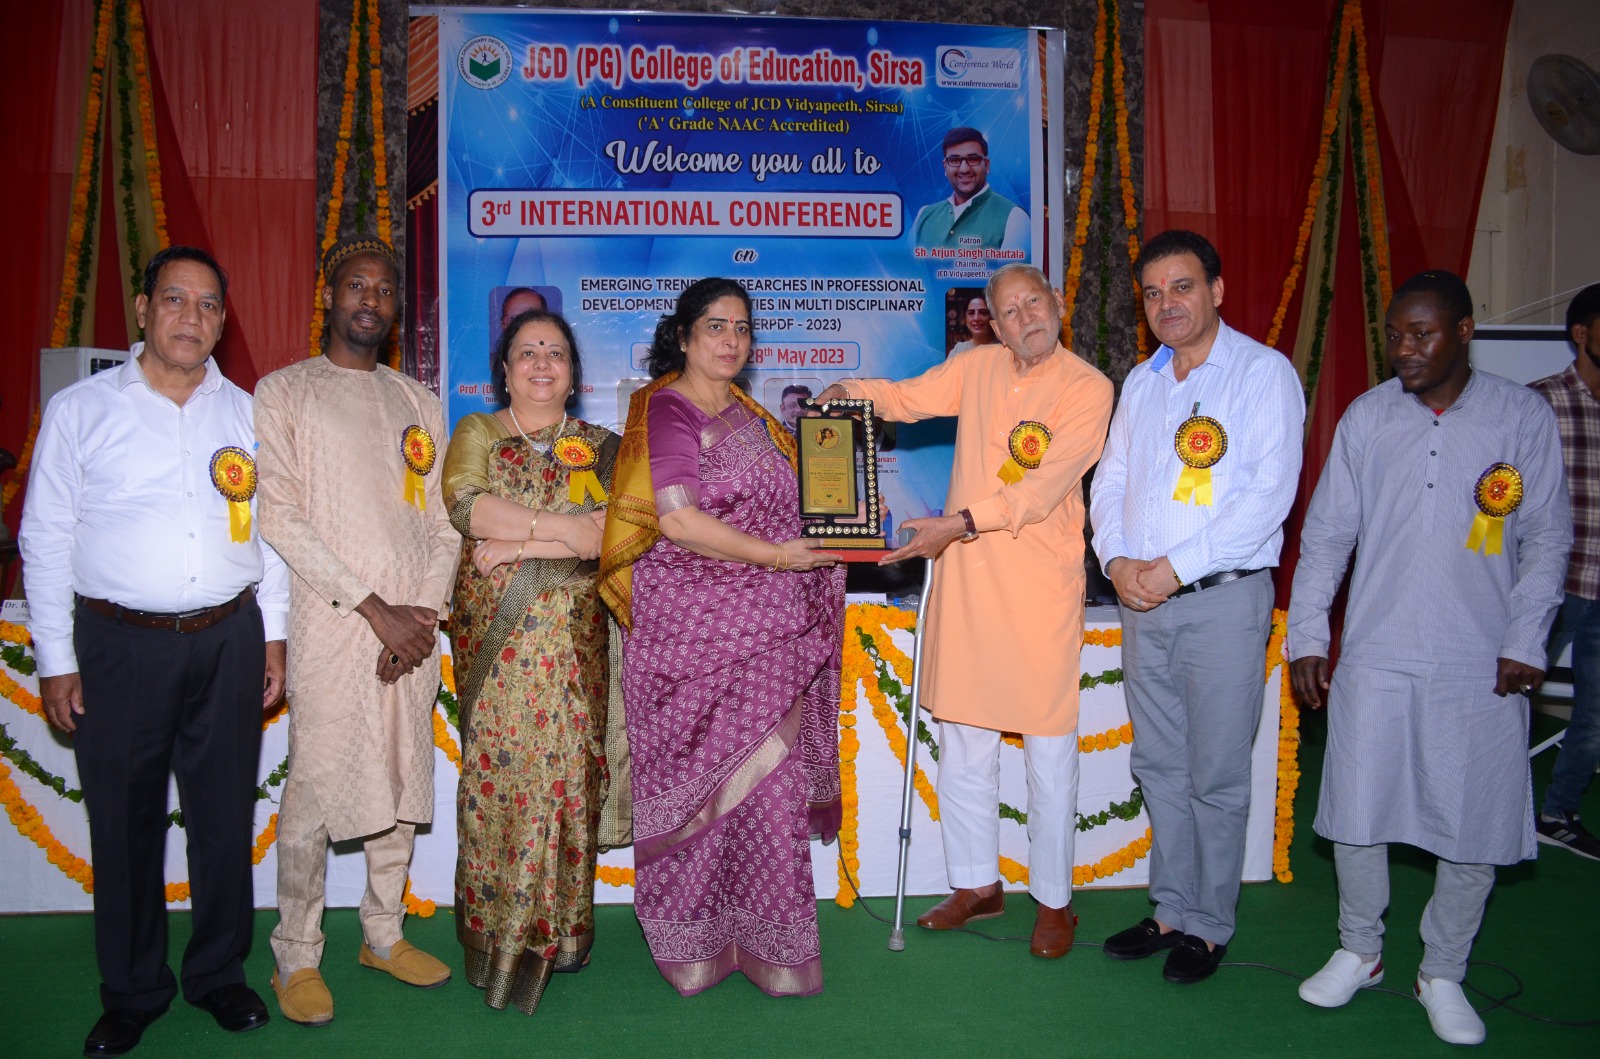 Inauguration of International Conference – JCD PG College of Education